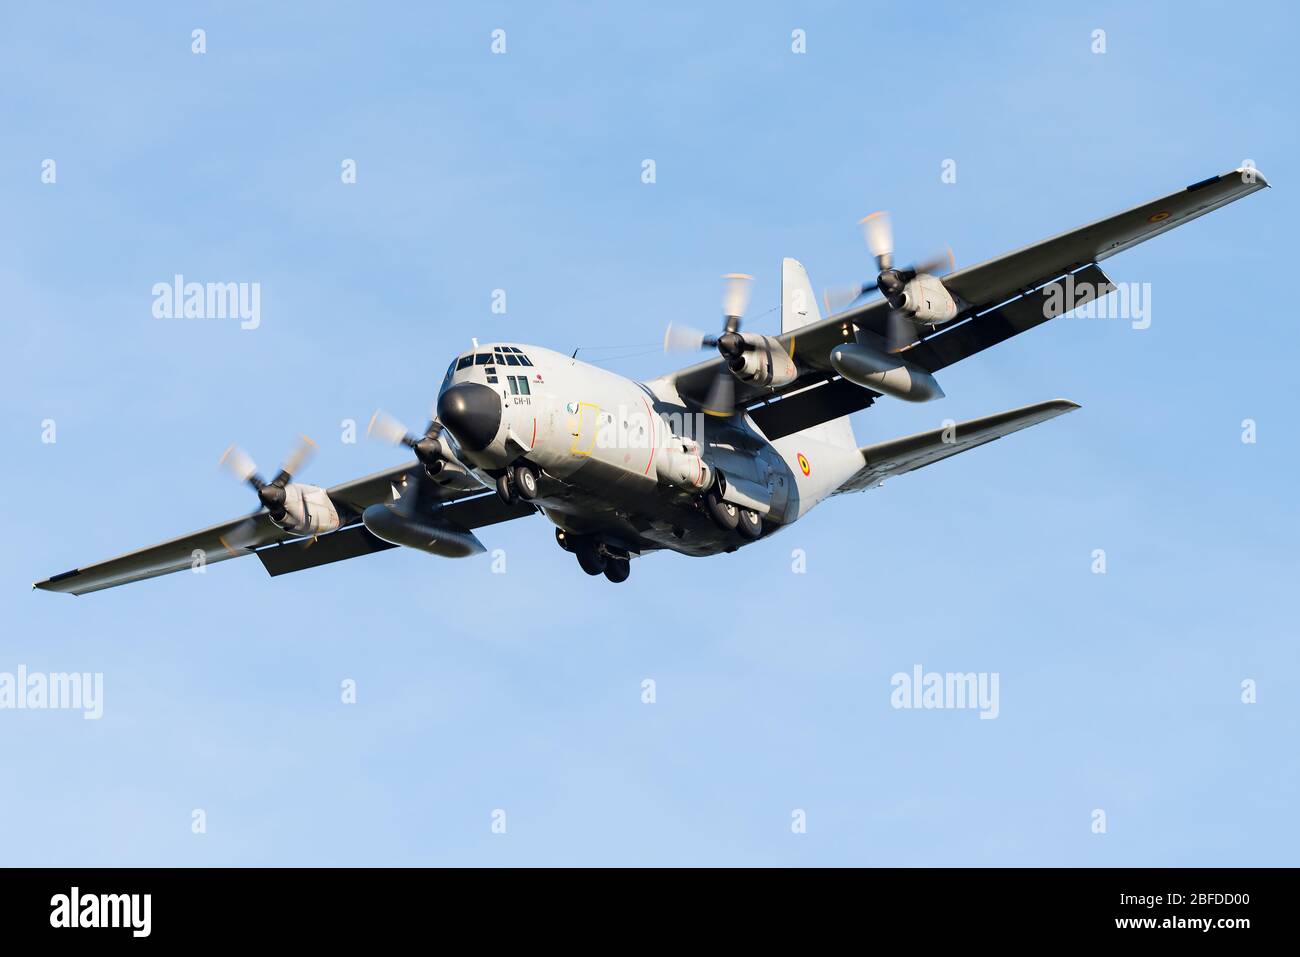 A Lockheed C-130 Hercules four-engine turboprop military transport aircraft of the Belgian Air Force. Stock Photo